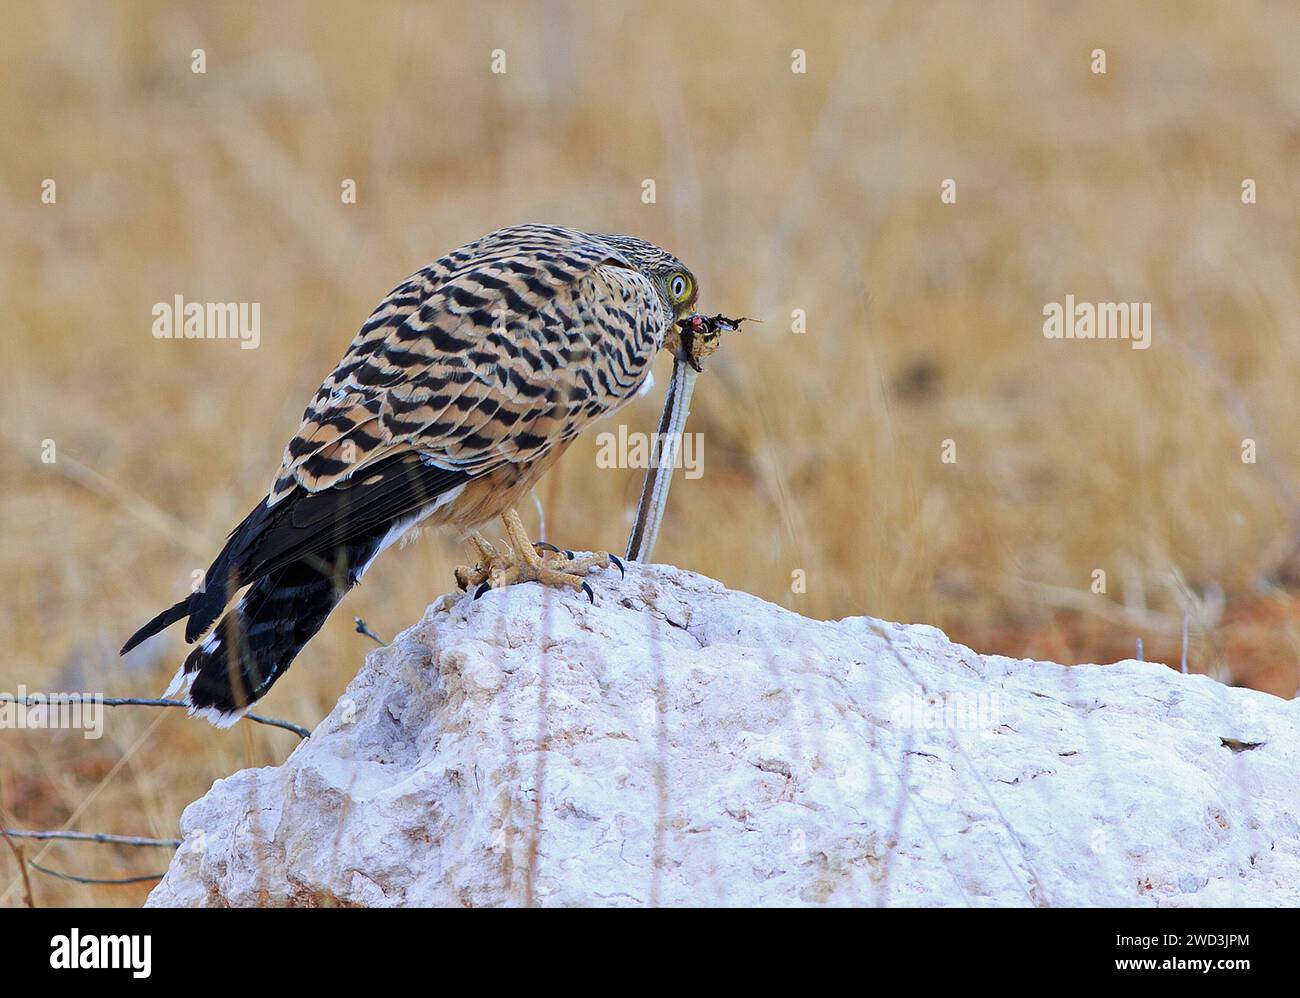 Greater Kestrel perched on a white boulder eating a snake Stock Photo